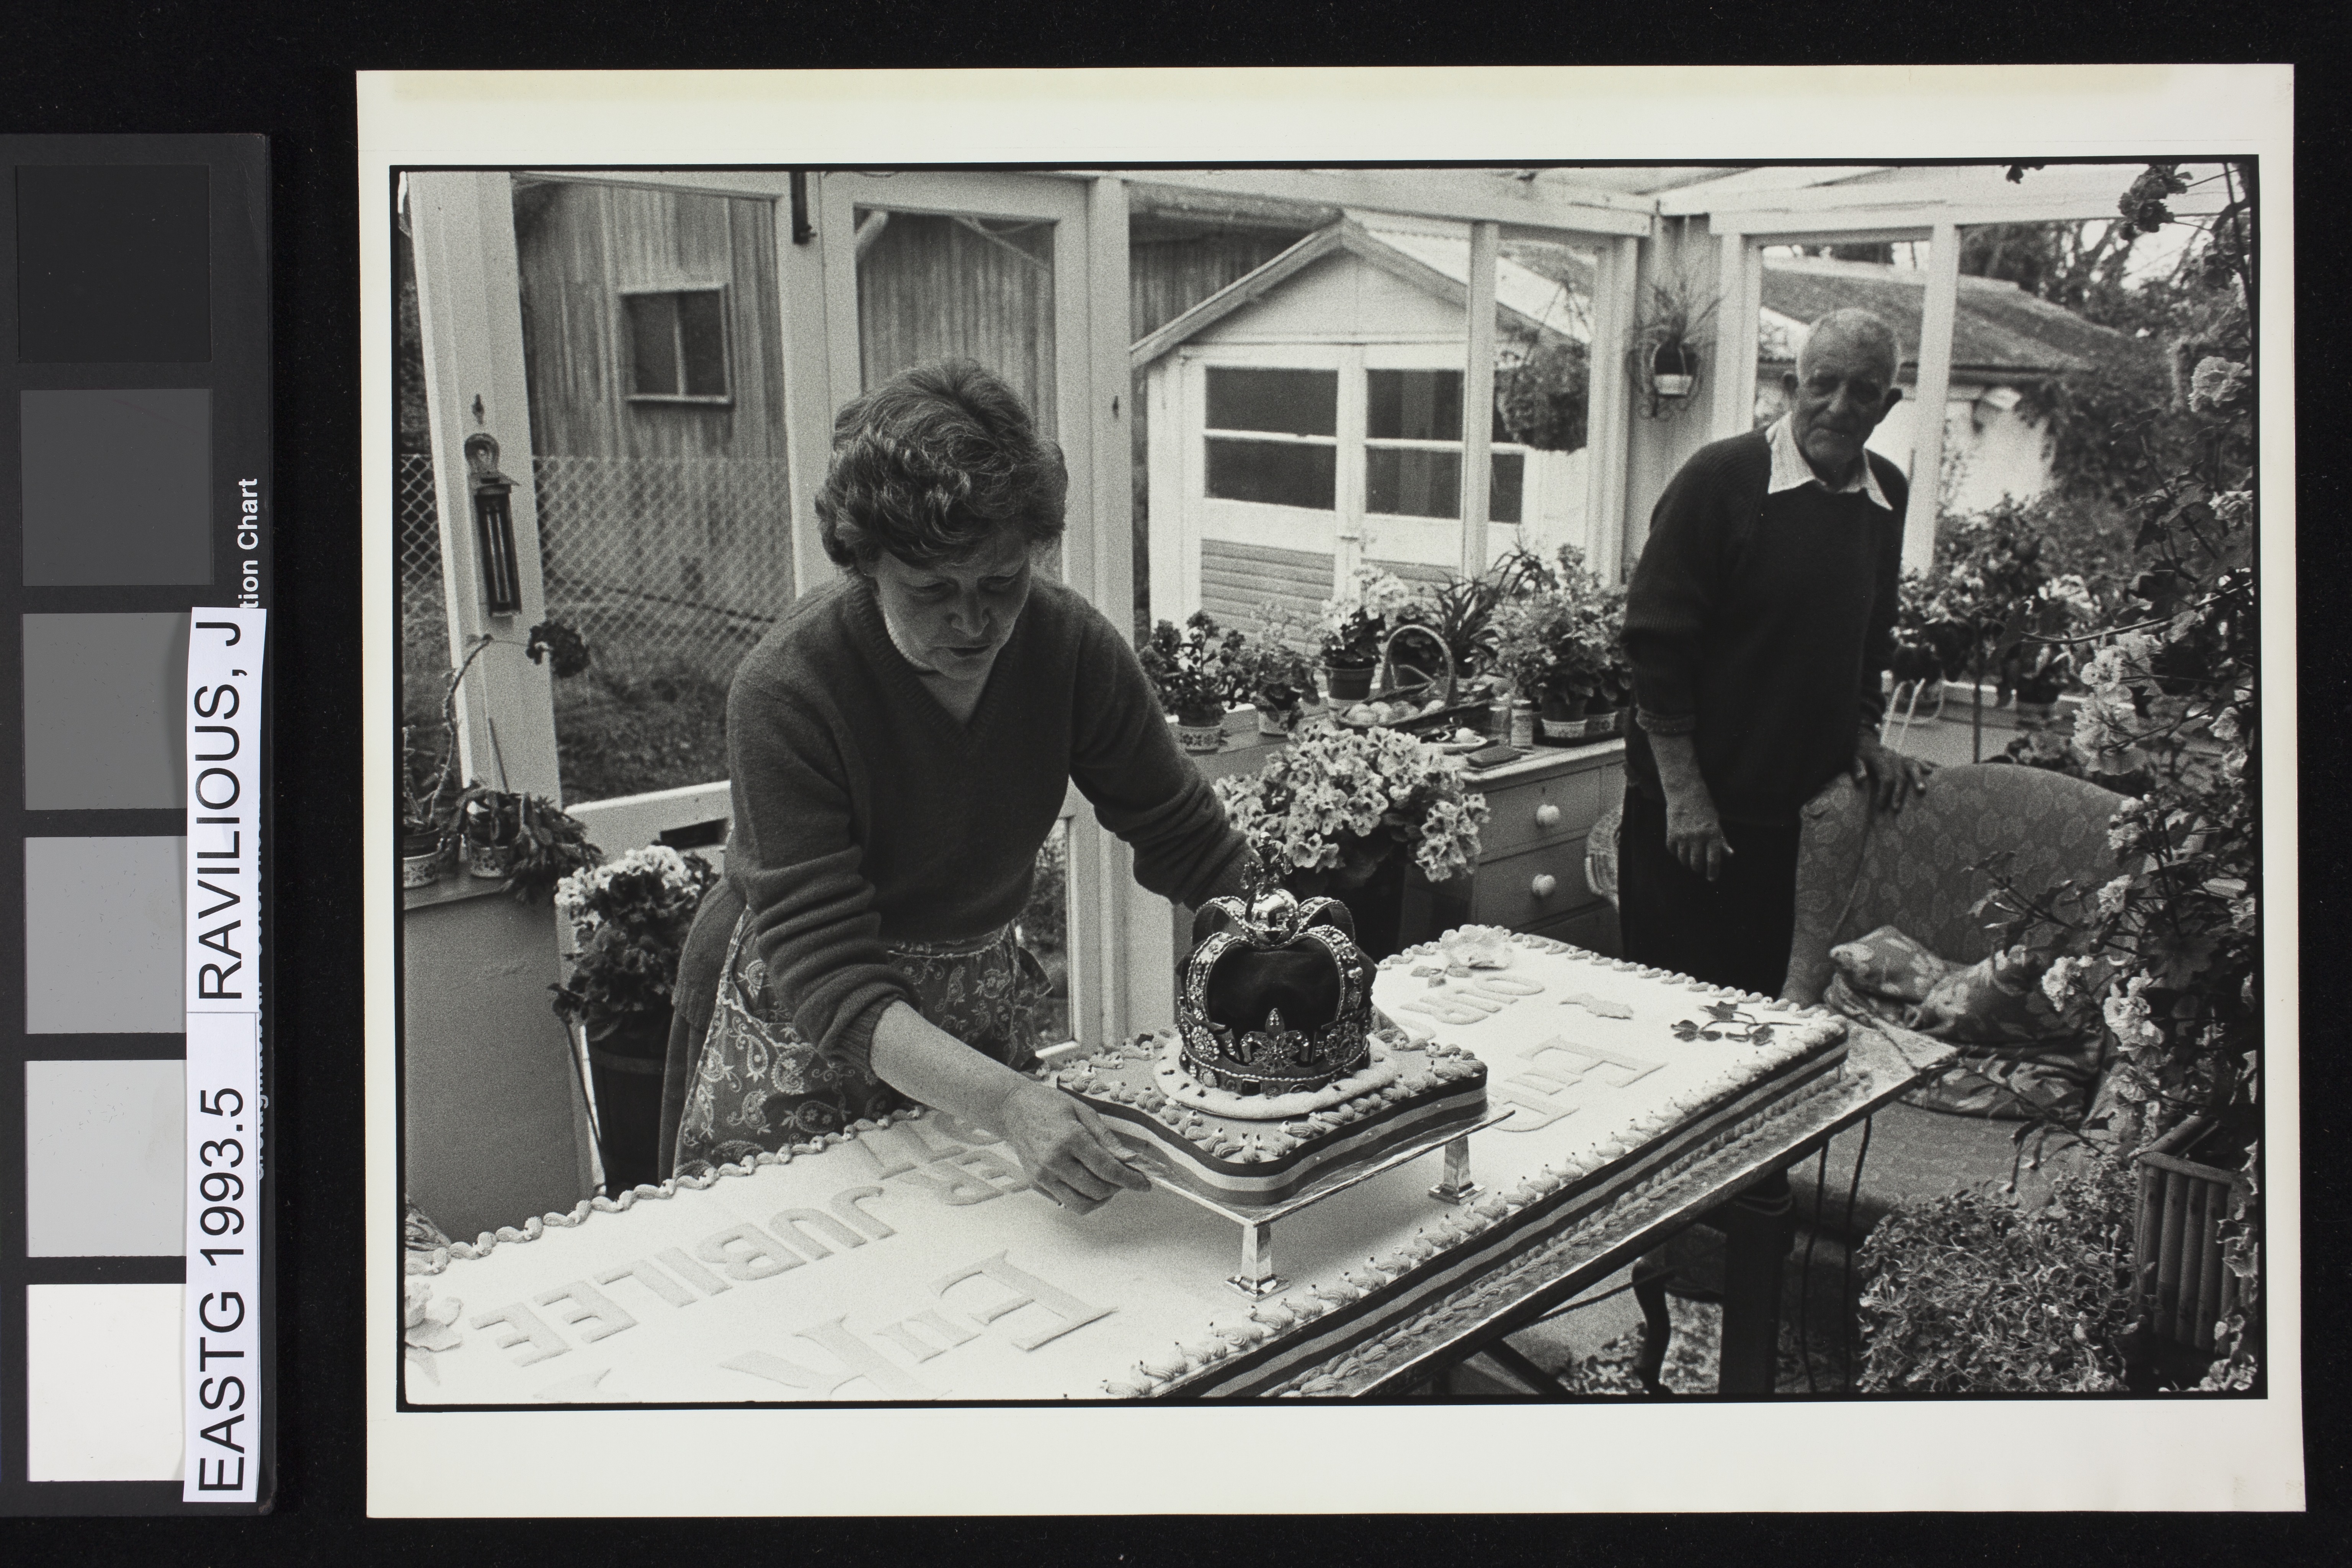 Joan and Cyril Dumbleton with Dolton’s Jubilee cake, 6 June 1977 (Twelve photographs from the Beaford Photographic Archive, Image 5) (1977)